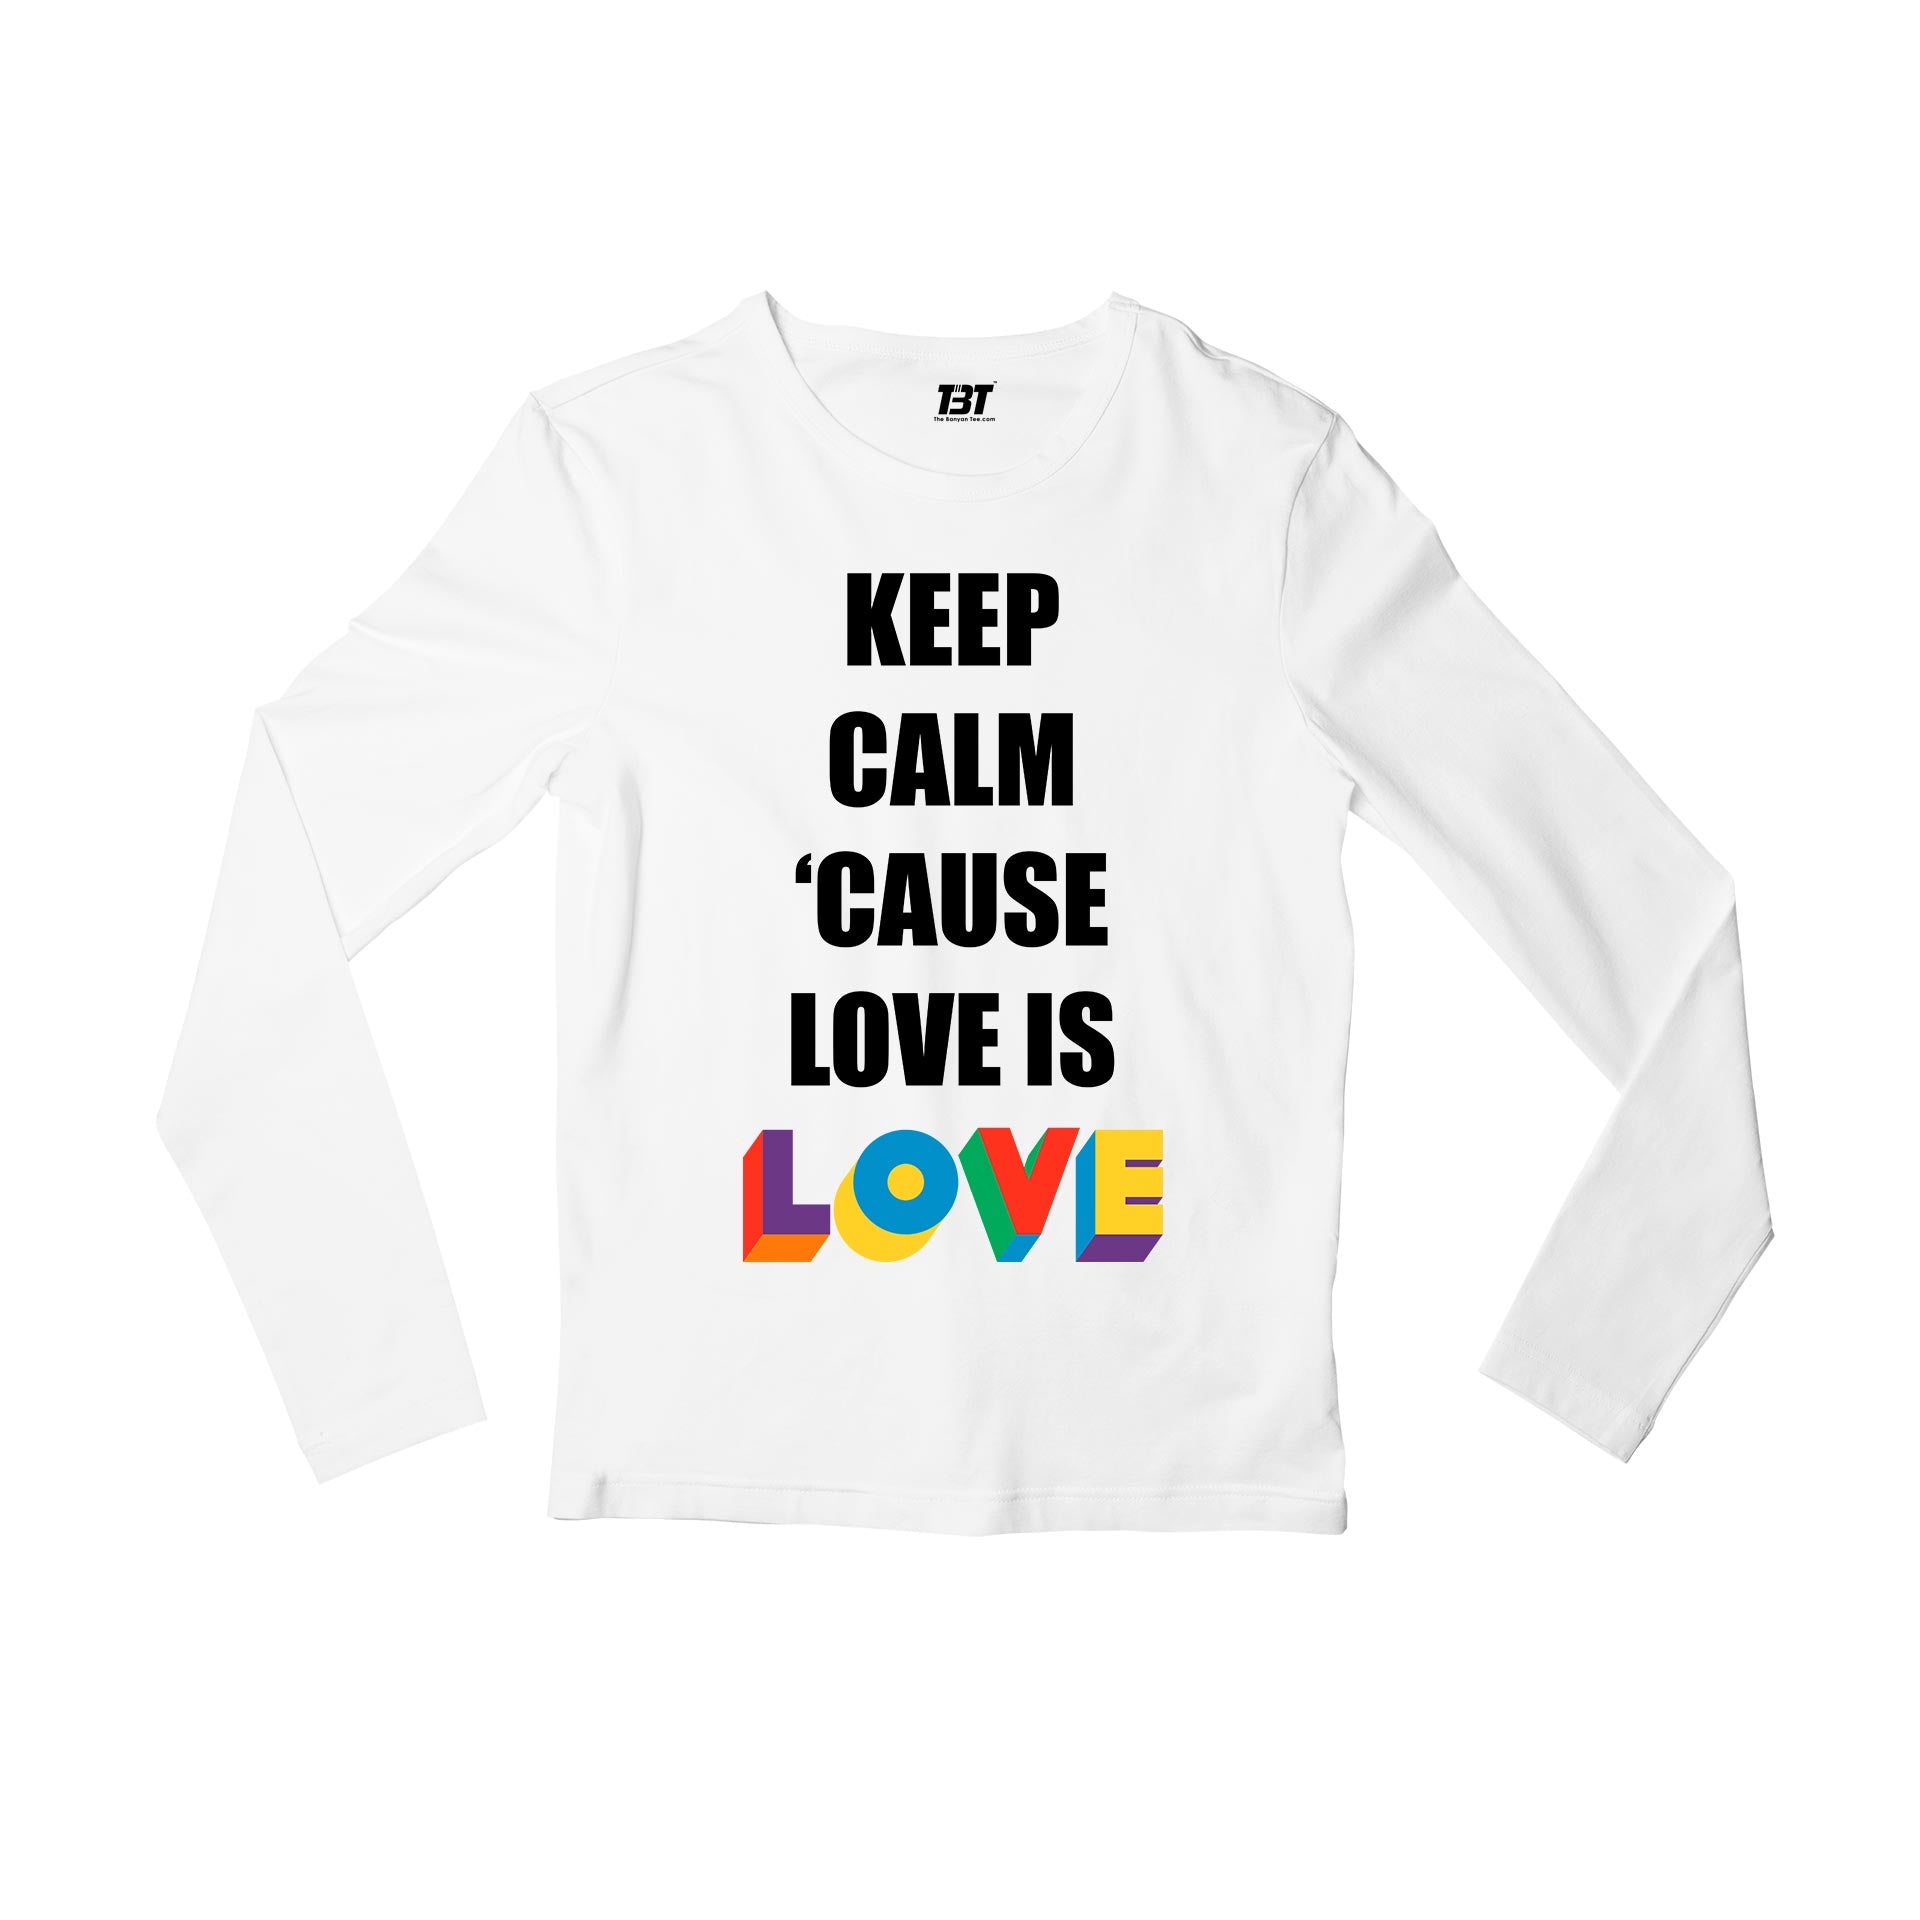 pride keep calm because love is love full sleeves long sleeves printed graphic stylish buy online india the banyan tee tbt men women girls boys unisex white - lgbtqia+